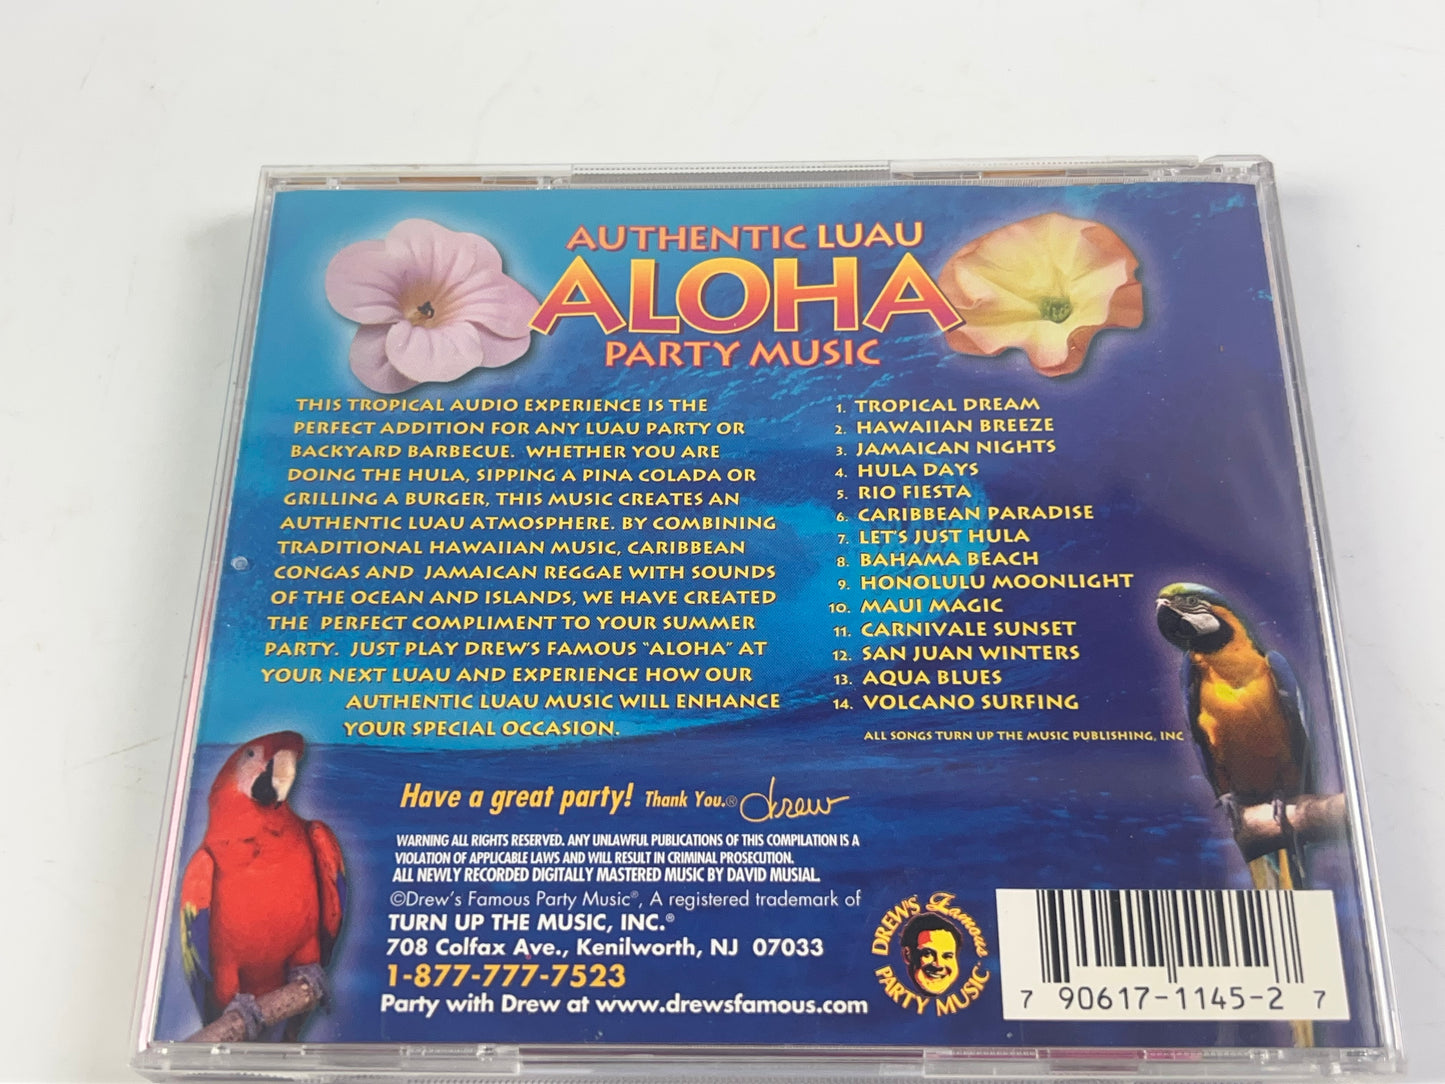 Drew's Famous Party Music: Authentic Luau Aloha: Sounds Of The Islands-2000 CD